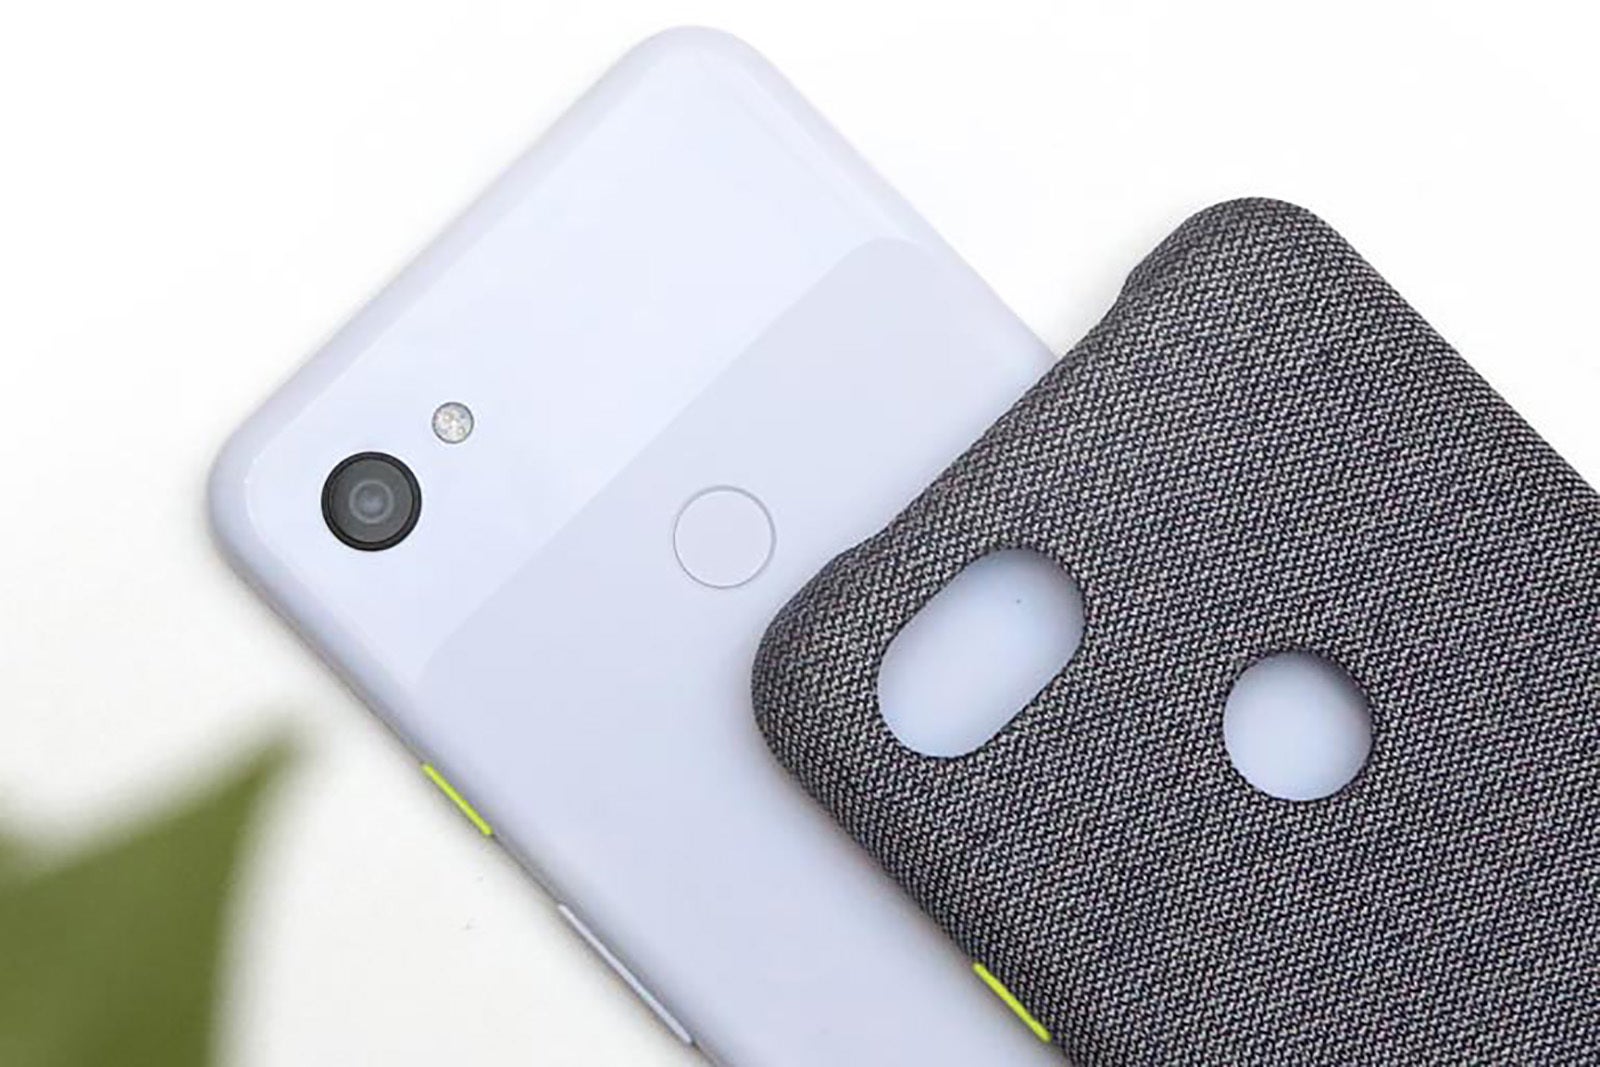 Google Pixel 3a and Pixel 3a XL are now finally official: here's all you need to know